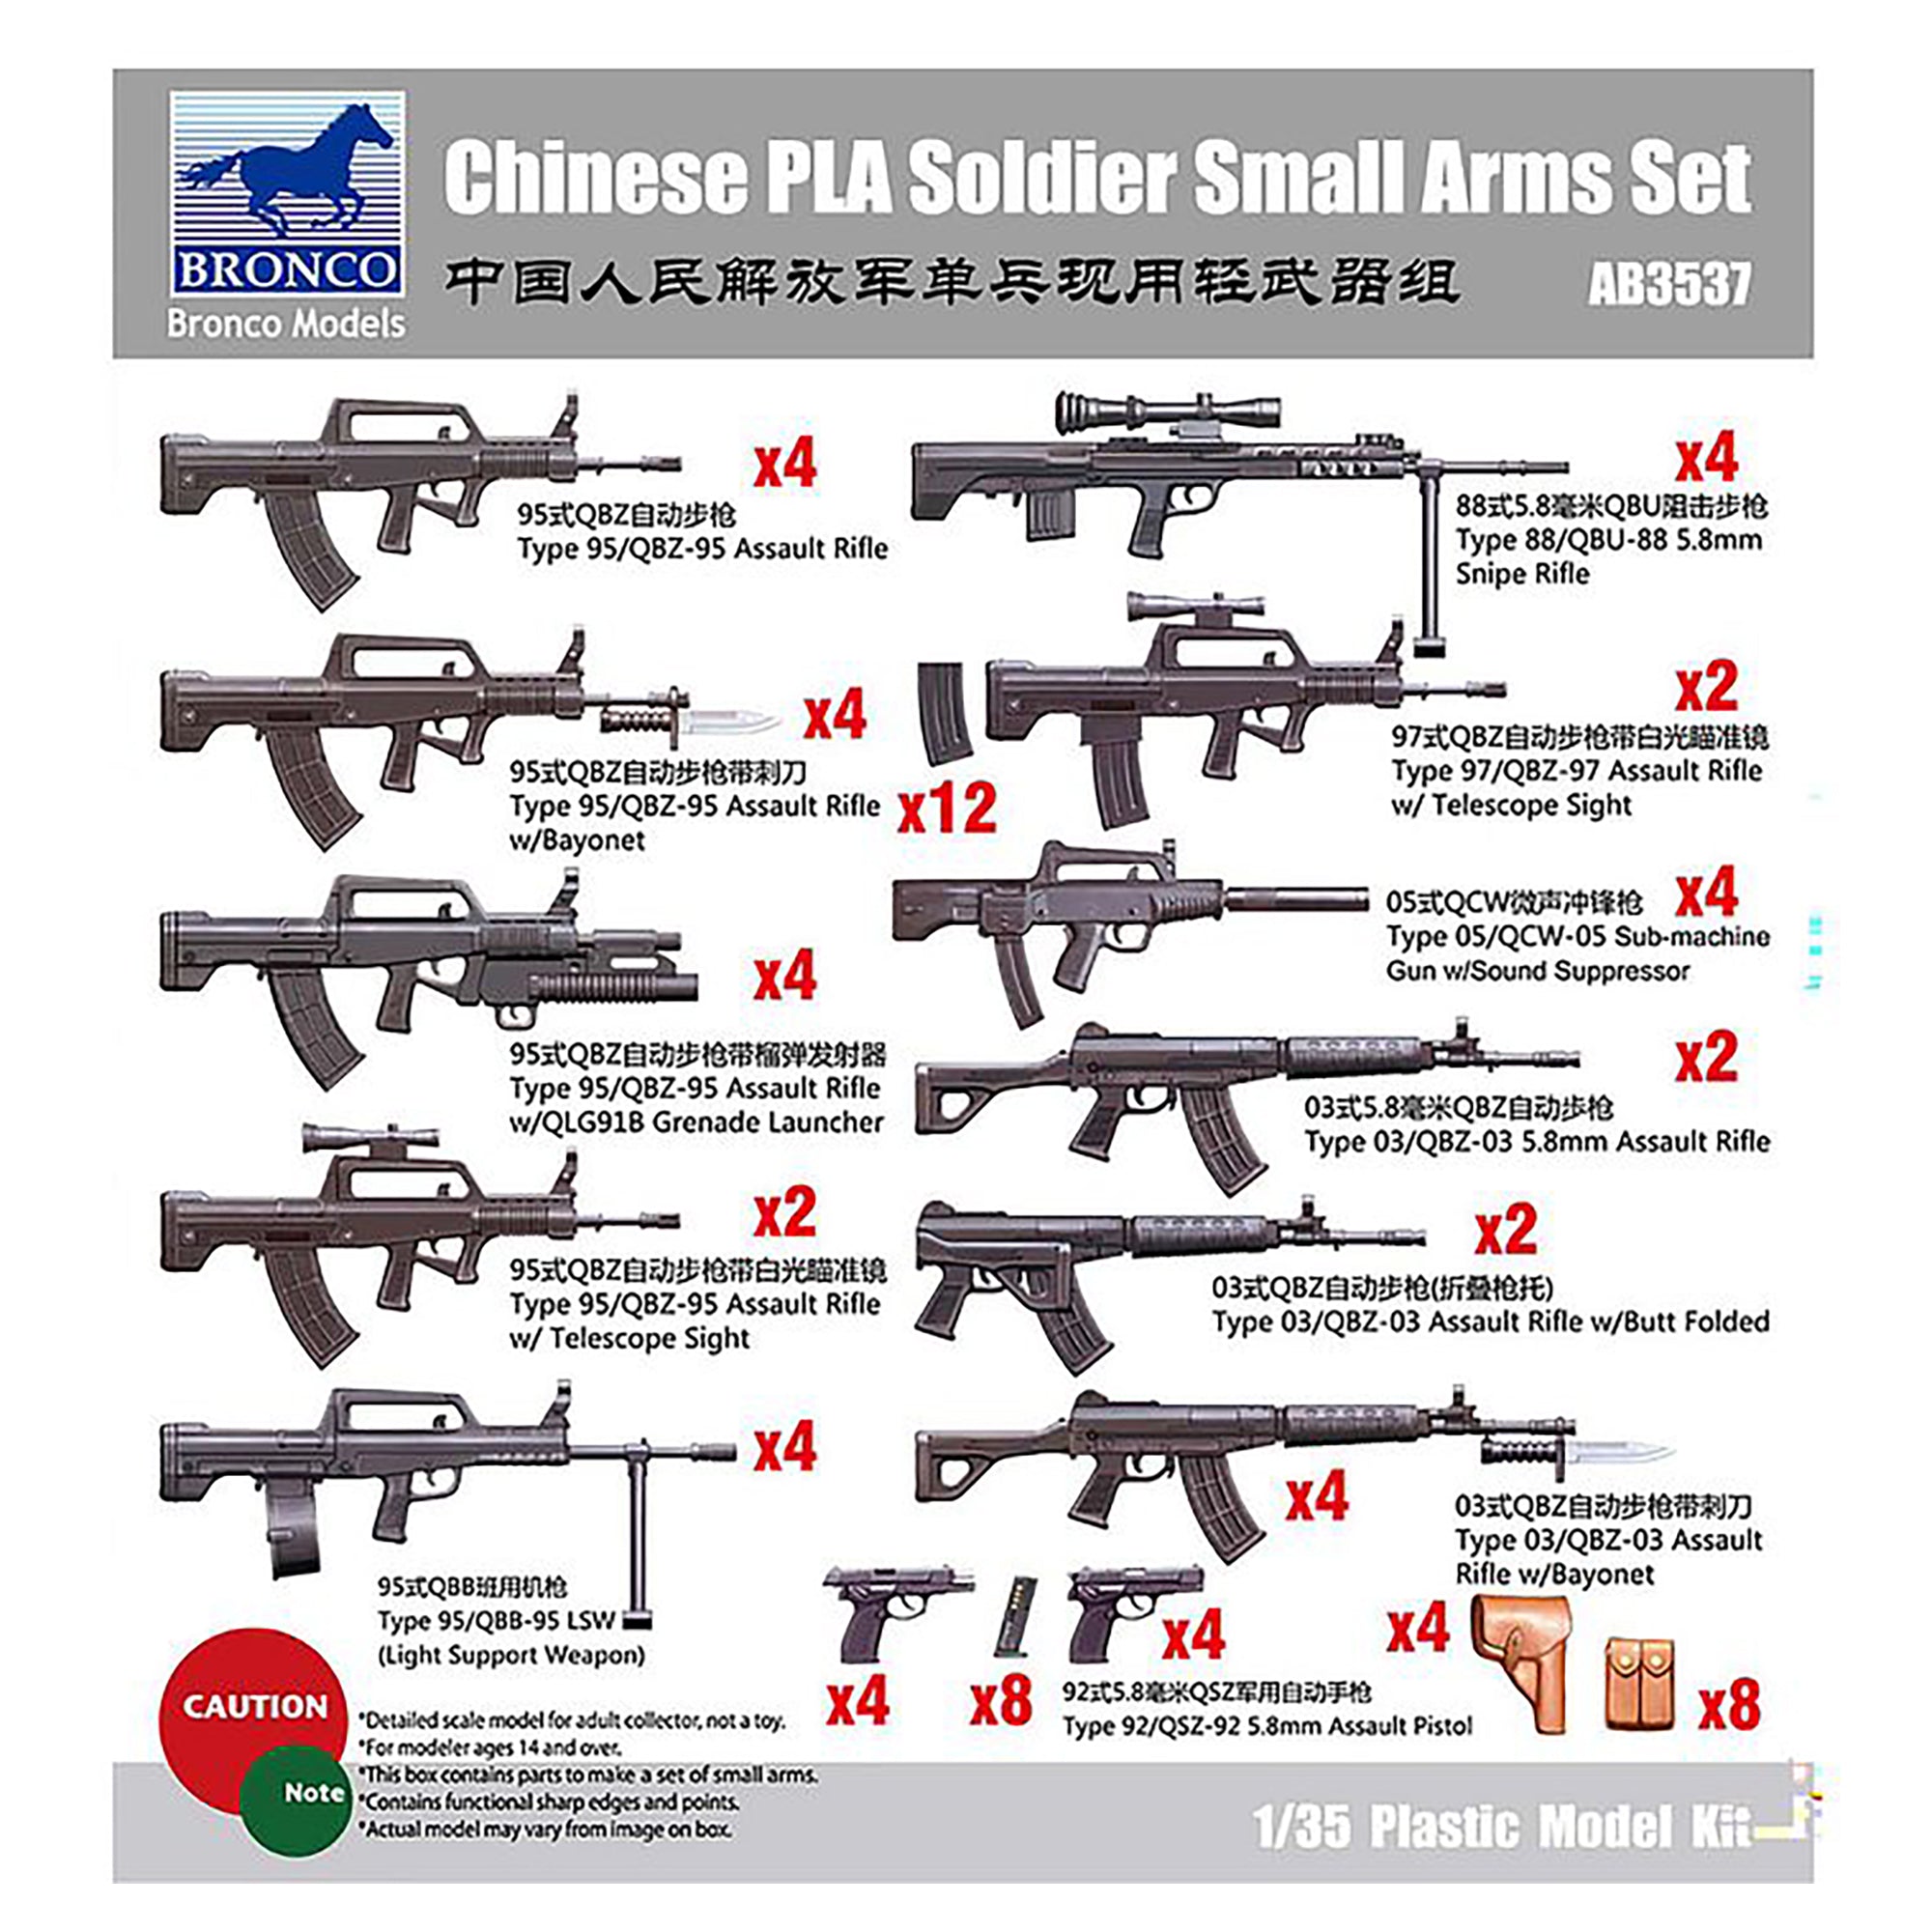 Bronco AB3537 1/35 Chinese PLA Soldier Small Arms Set Model Kit